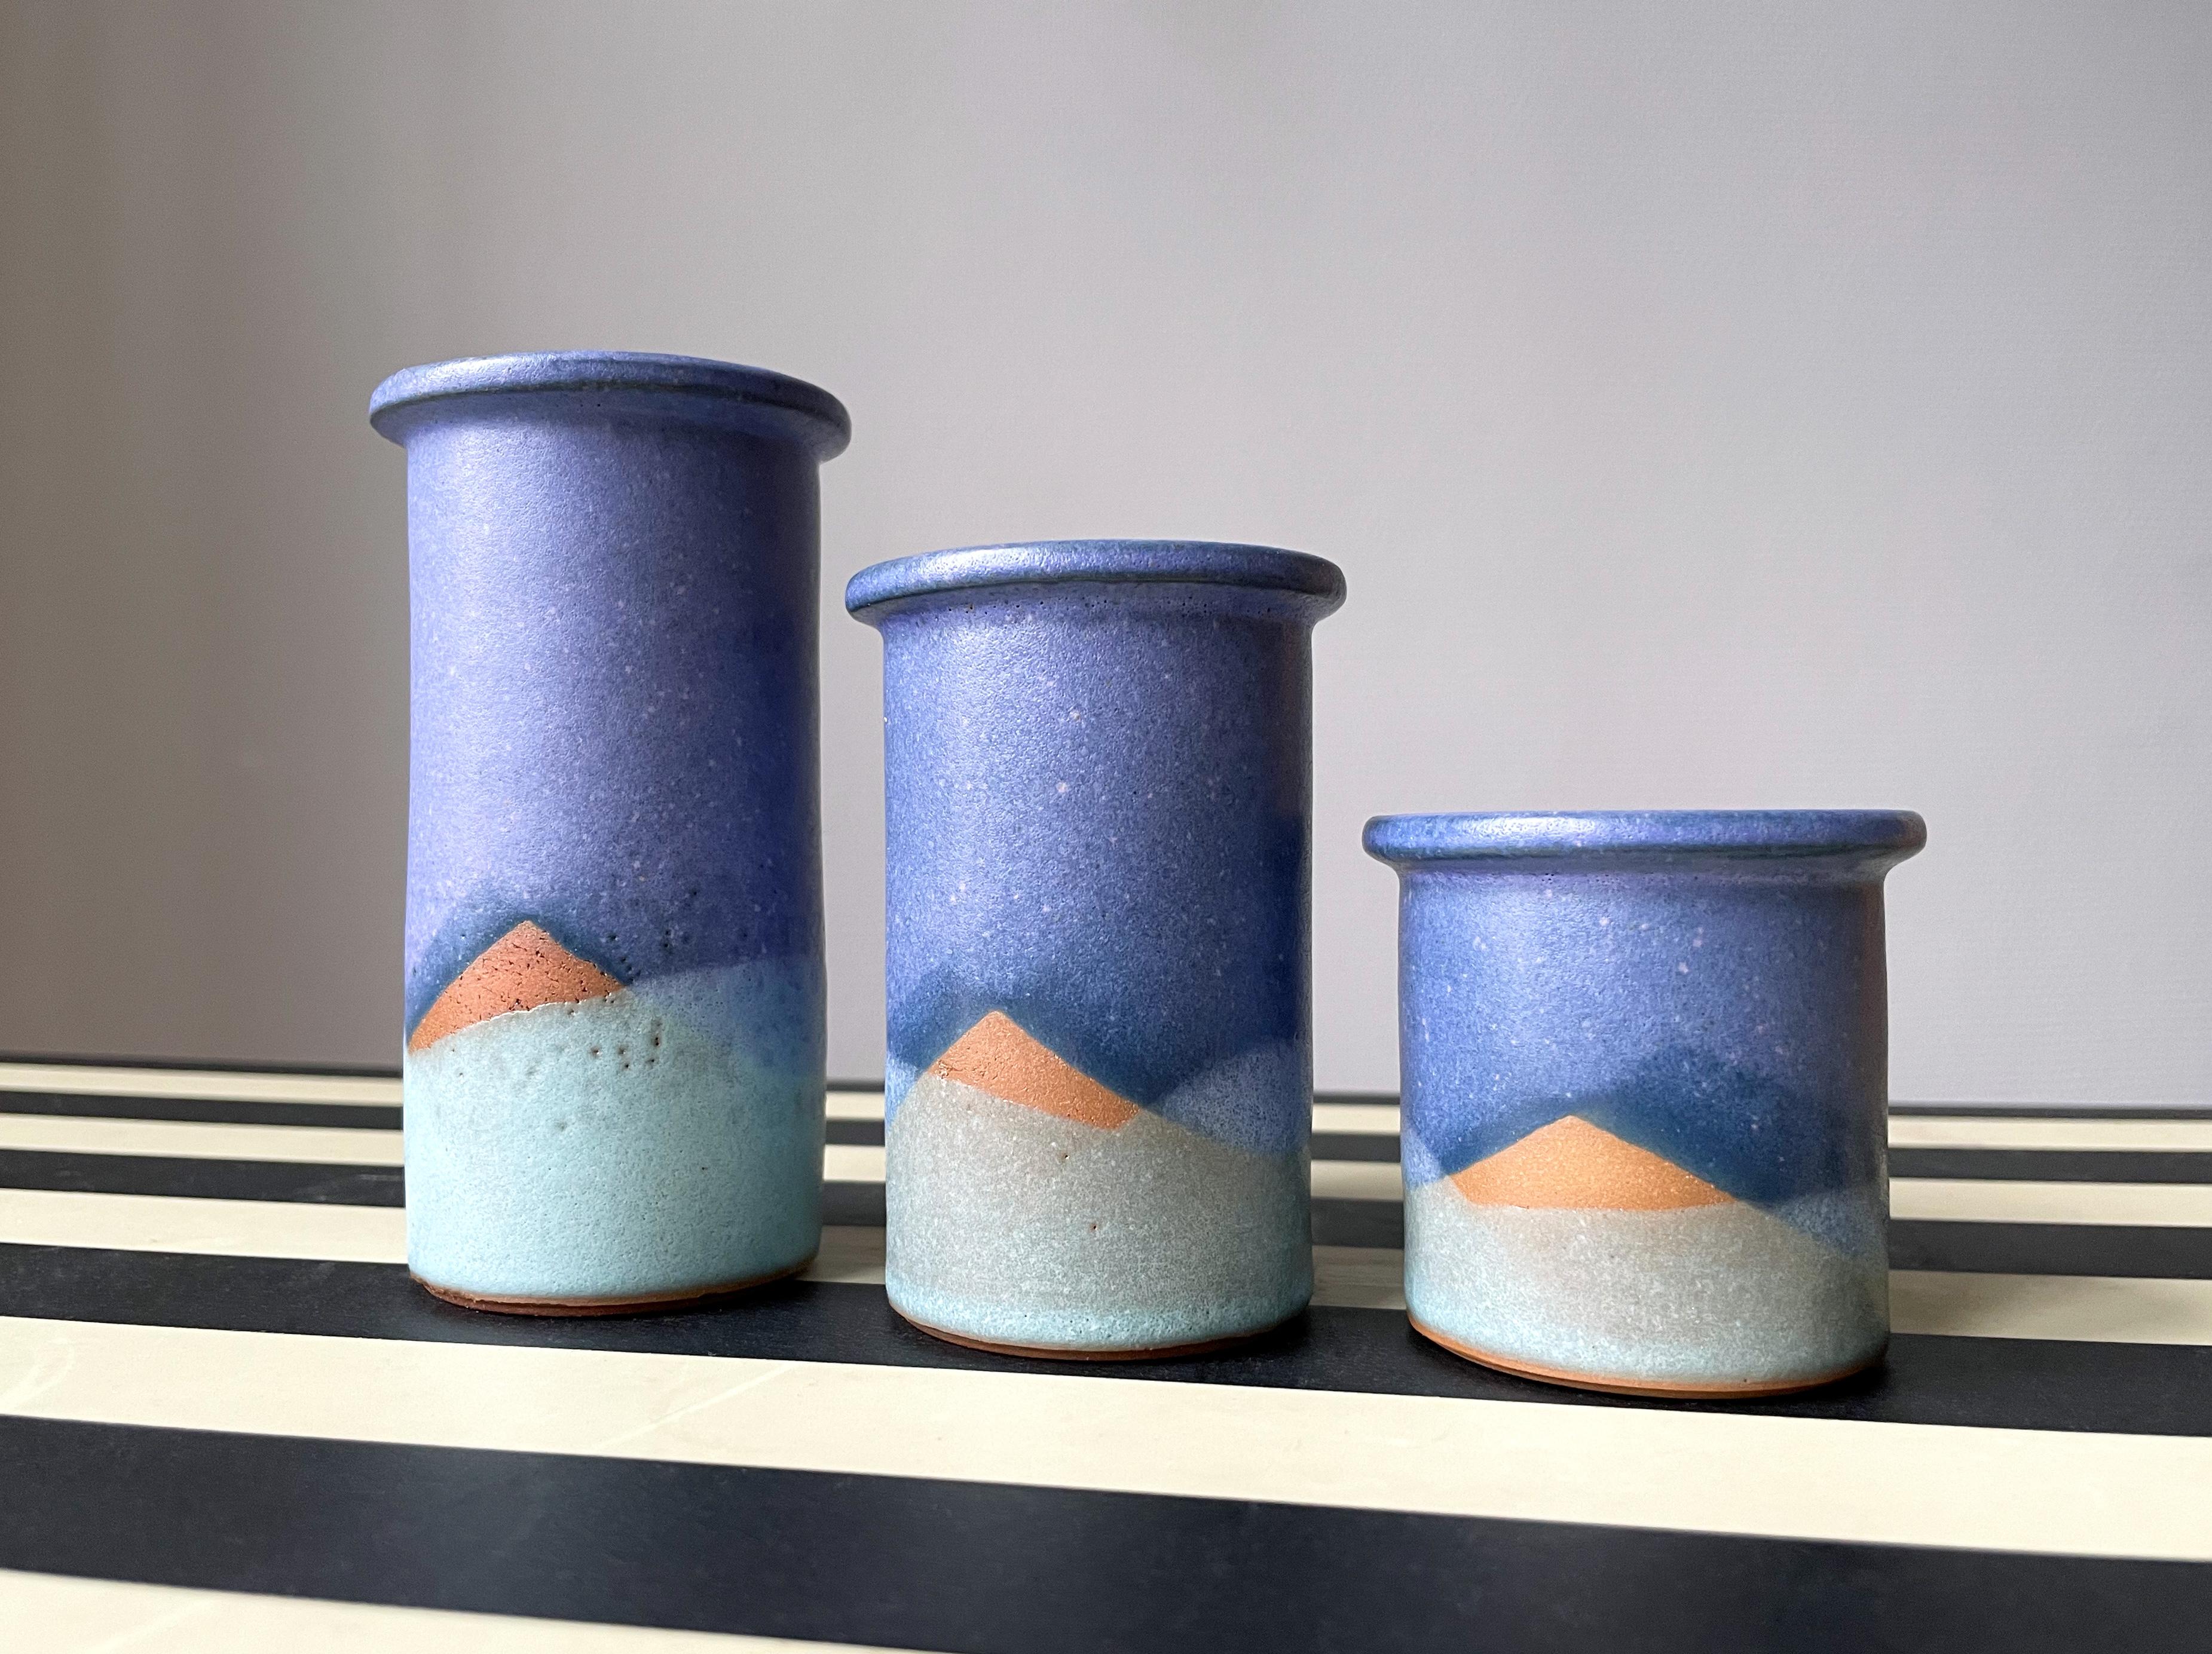 Set of three handmade Danish ceramic vases / candle sticks with graphic decor using the raw ceramic as part of a straight lined pattern resembling a landscape or a sunset. Same stylized decoration in blues and aqua green on all three vases. A small